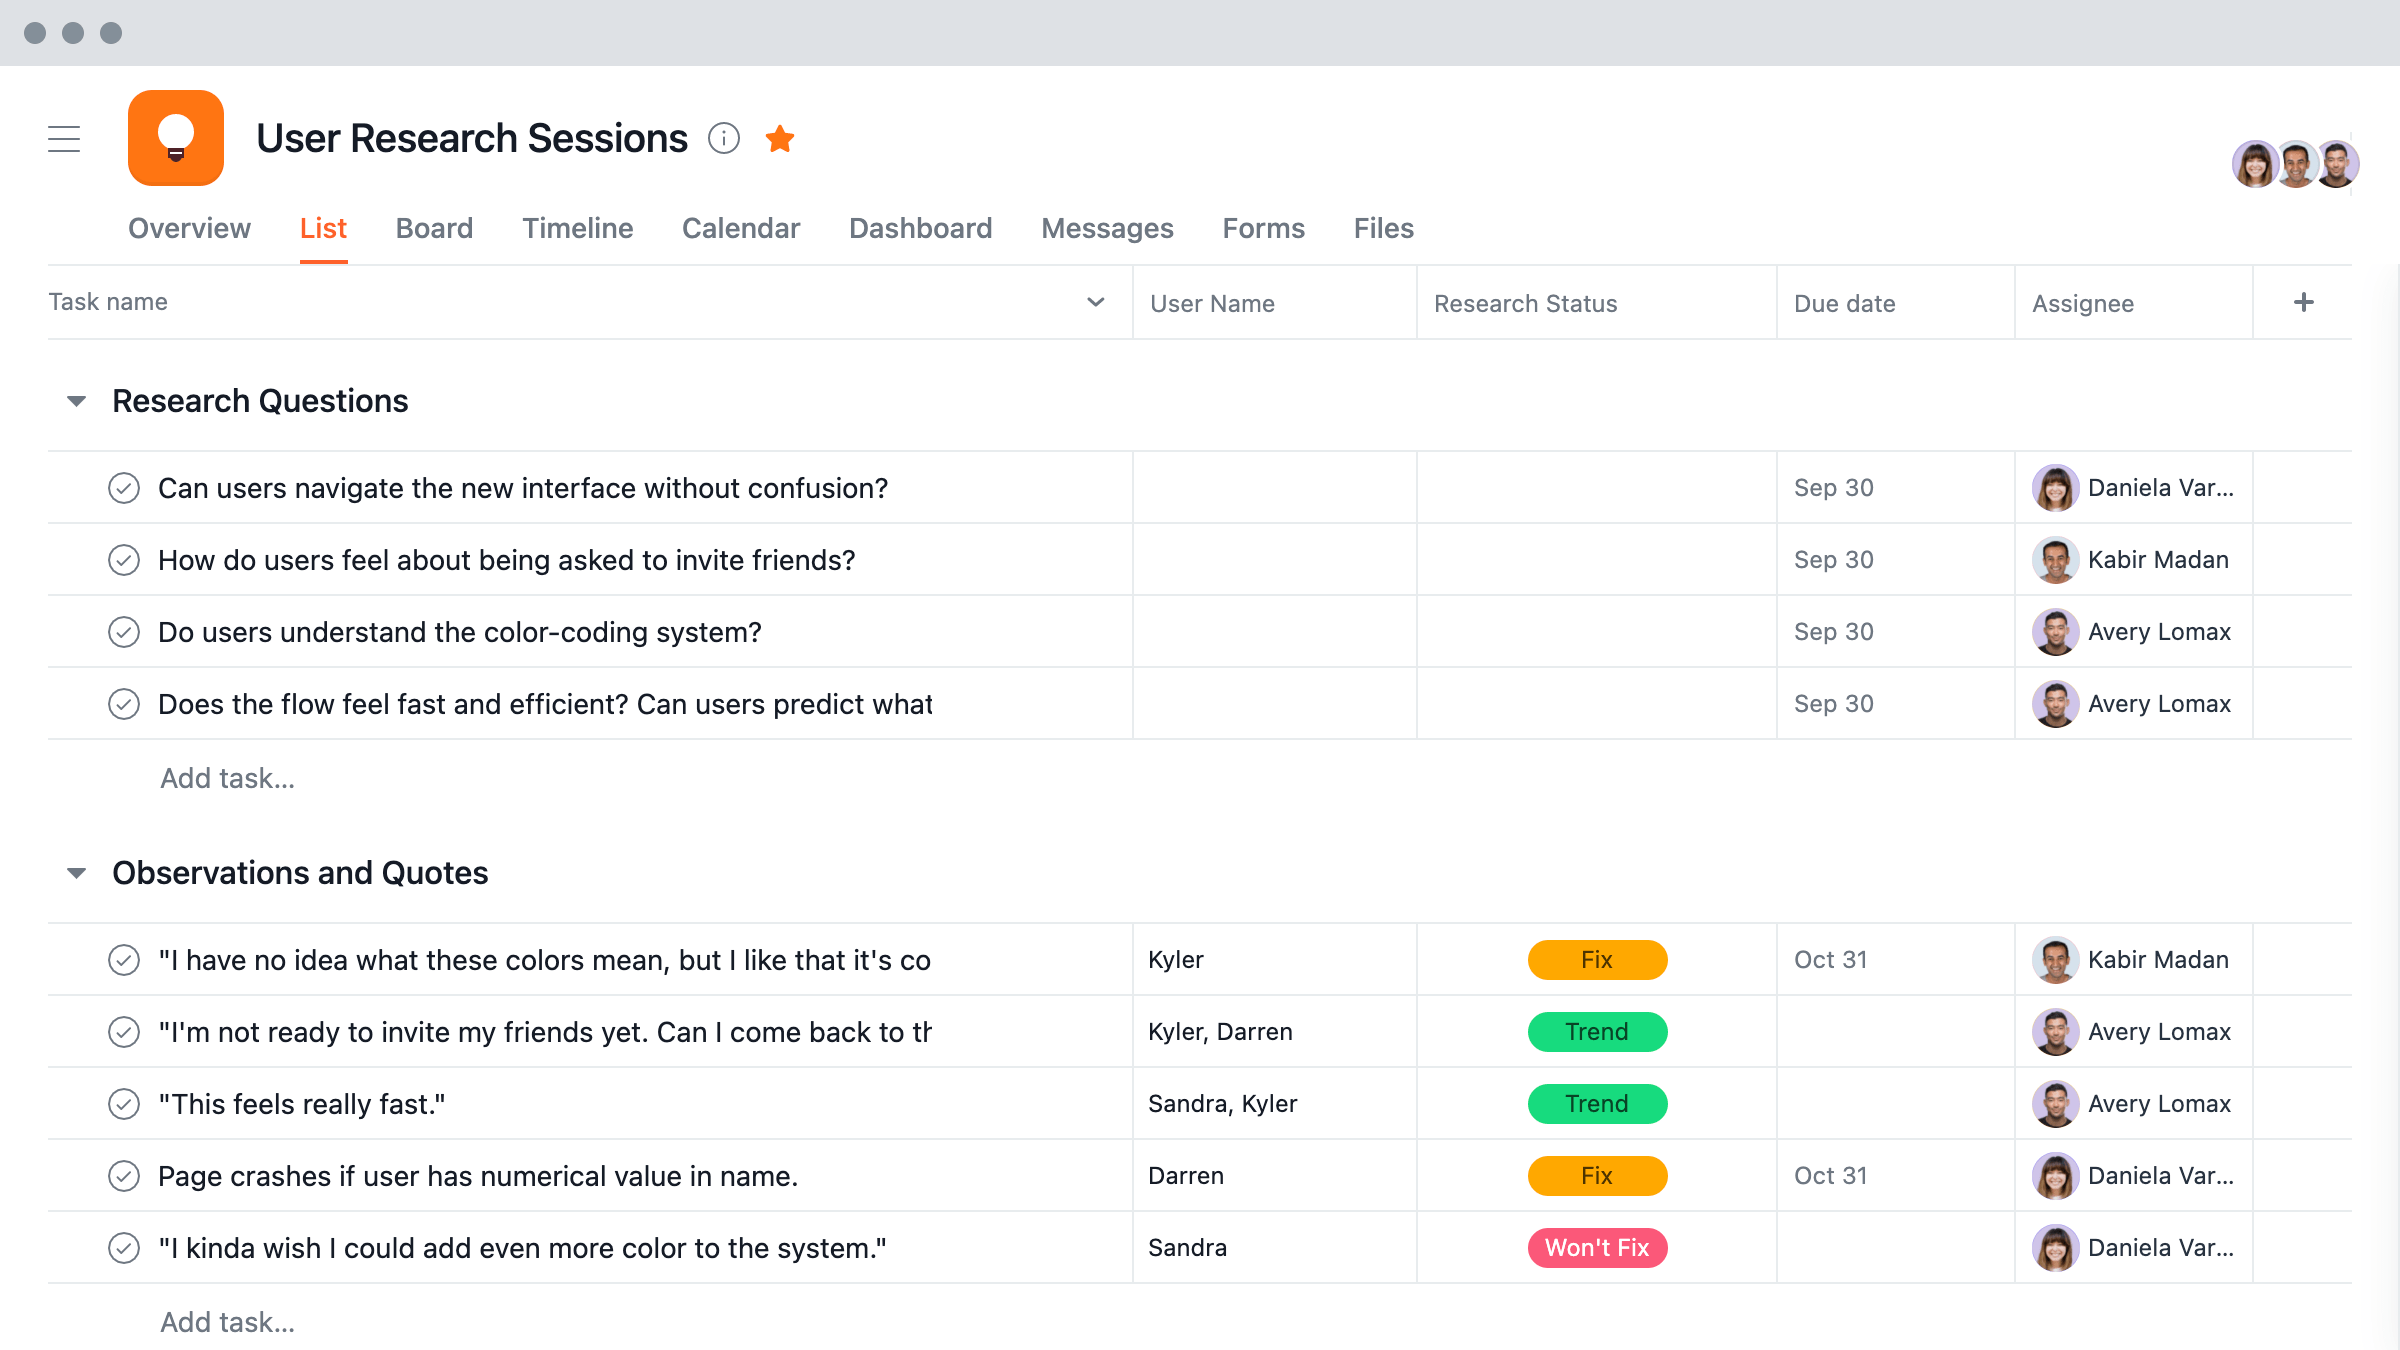 [Product UI] Project Plan Templates - User Research Template (Lists)